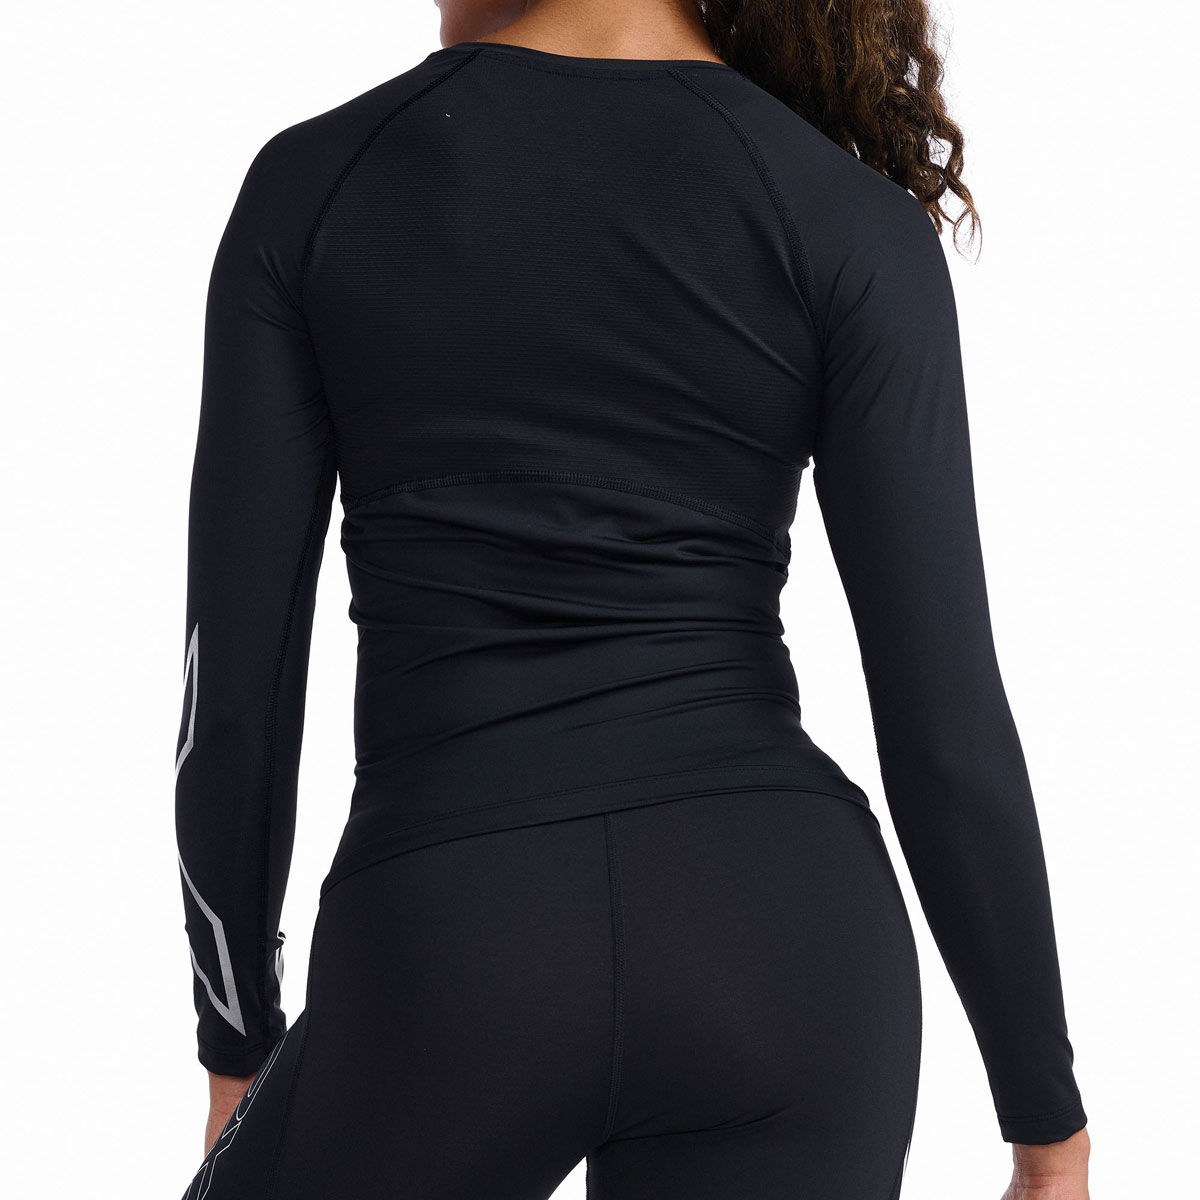 Women's - Compression Fit Leggings or Long Sleeves or Short Sleeves or  Shorts in Blue